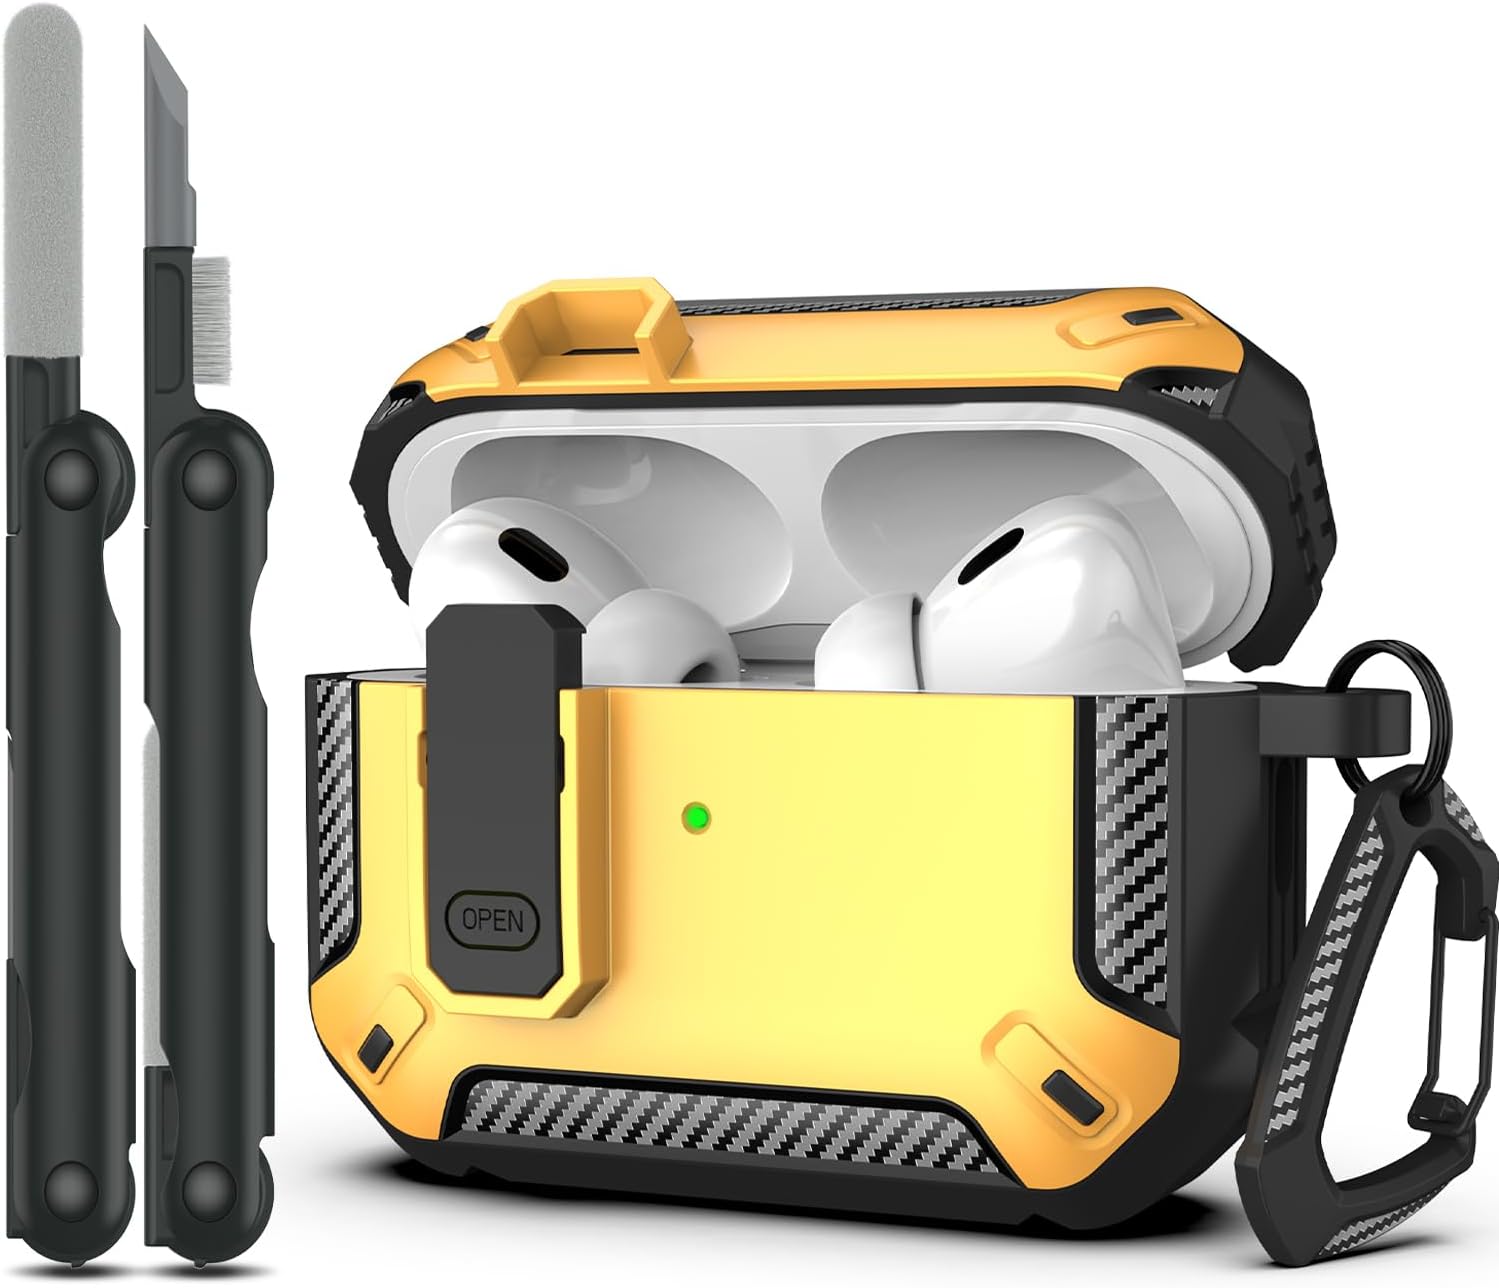 RFUNGUANGO AirPods Pro Military Case Industry Yellow - Protective Armor with Lock for AirPods - AirPods Case With Lock - With Cleaning Kit